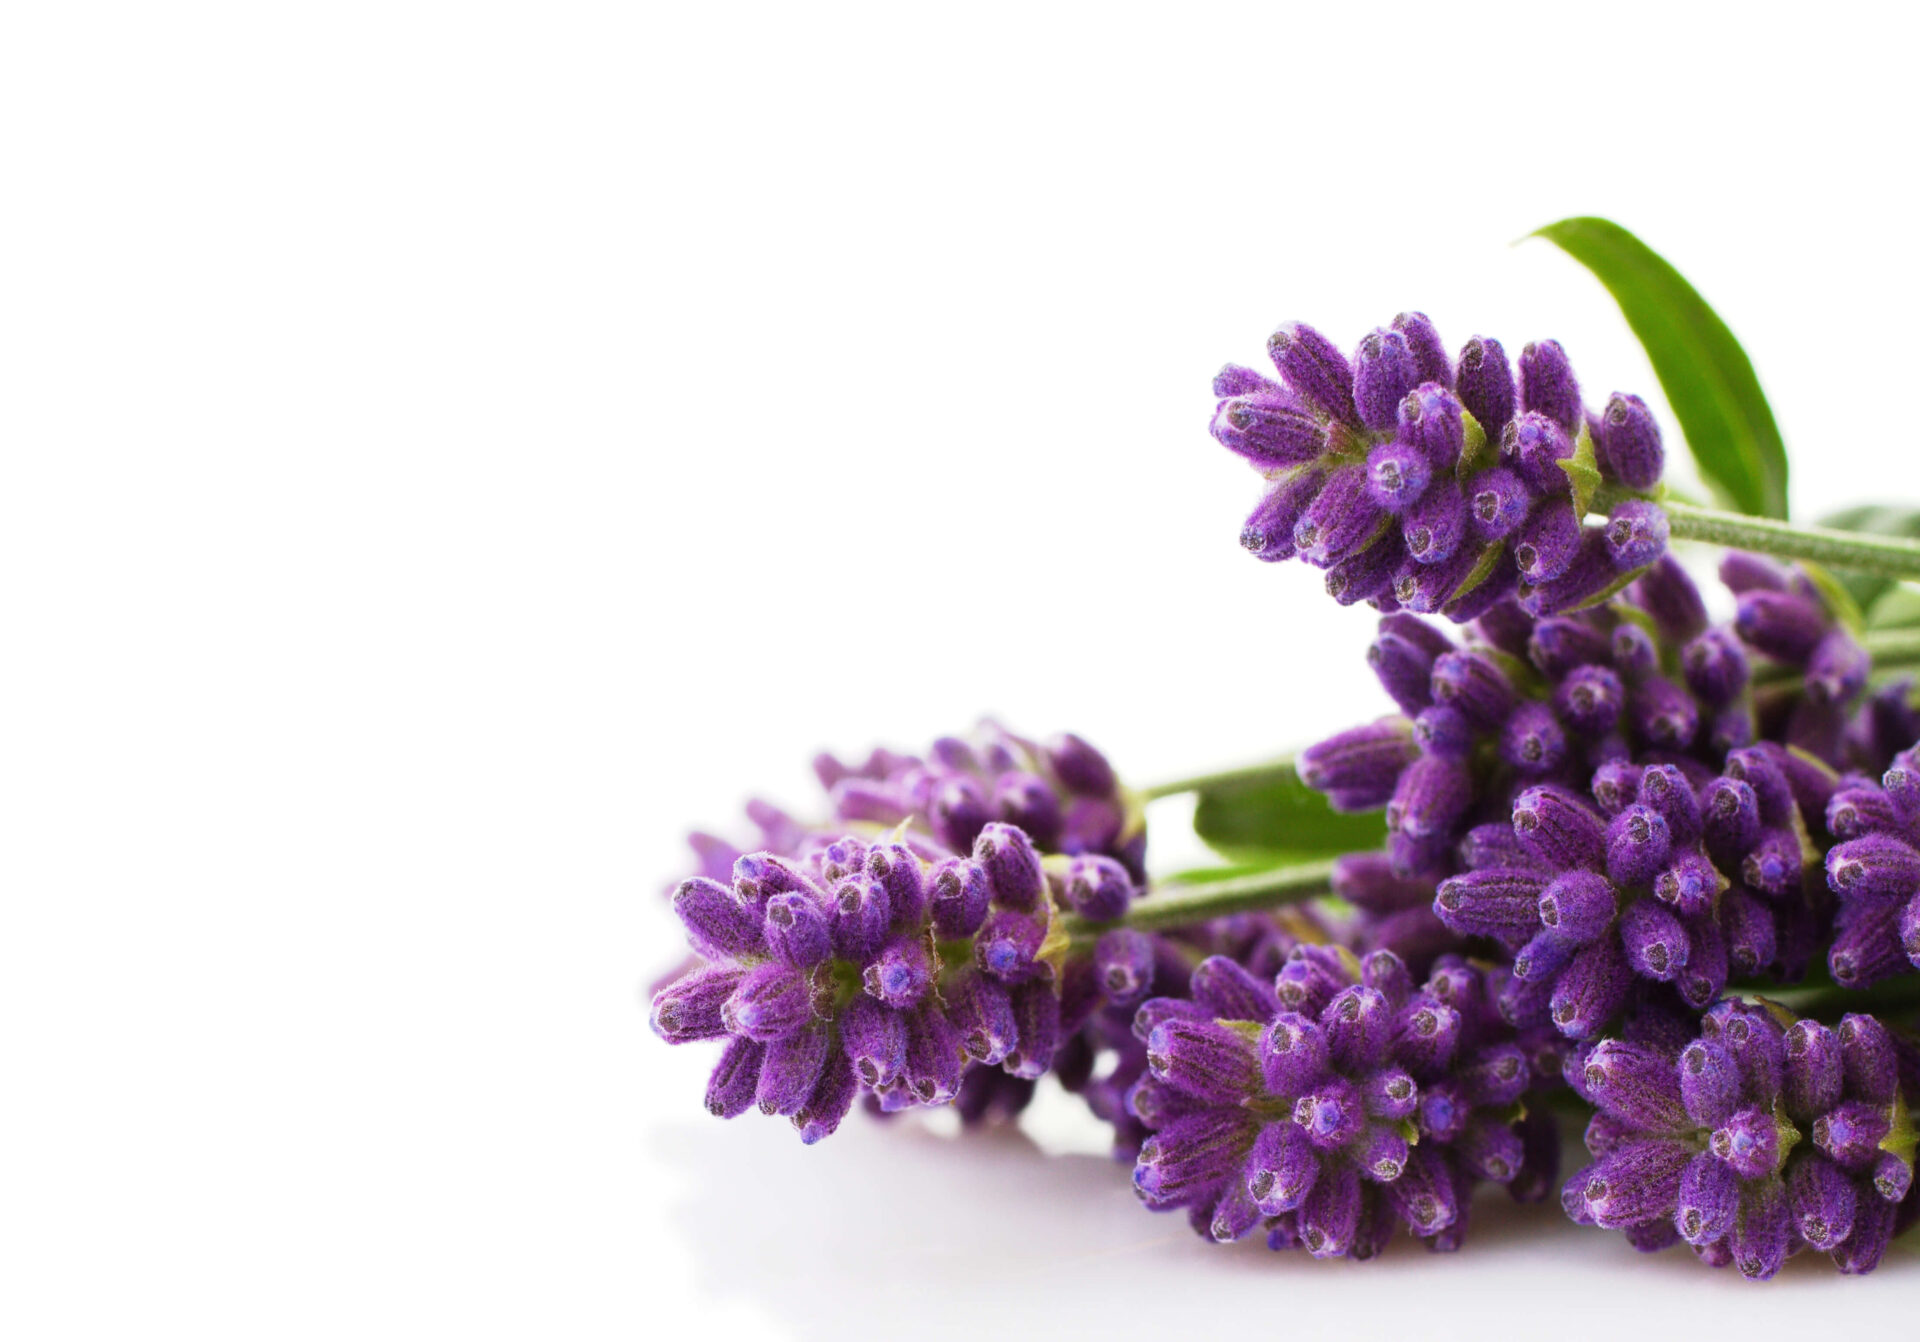 purple hyacinths offer a wonderful fragrance and is represented in some of our fragrance ingredients